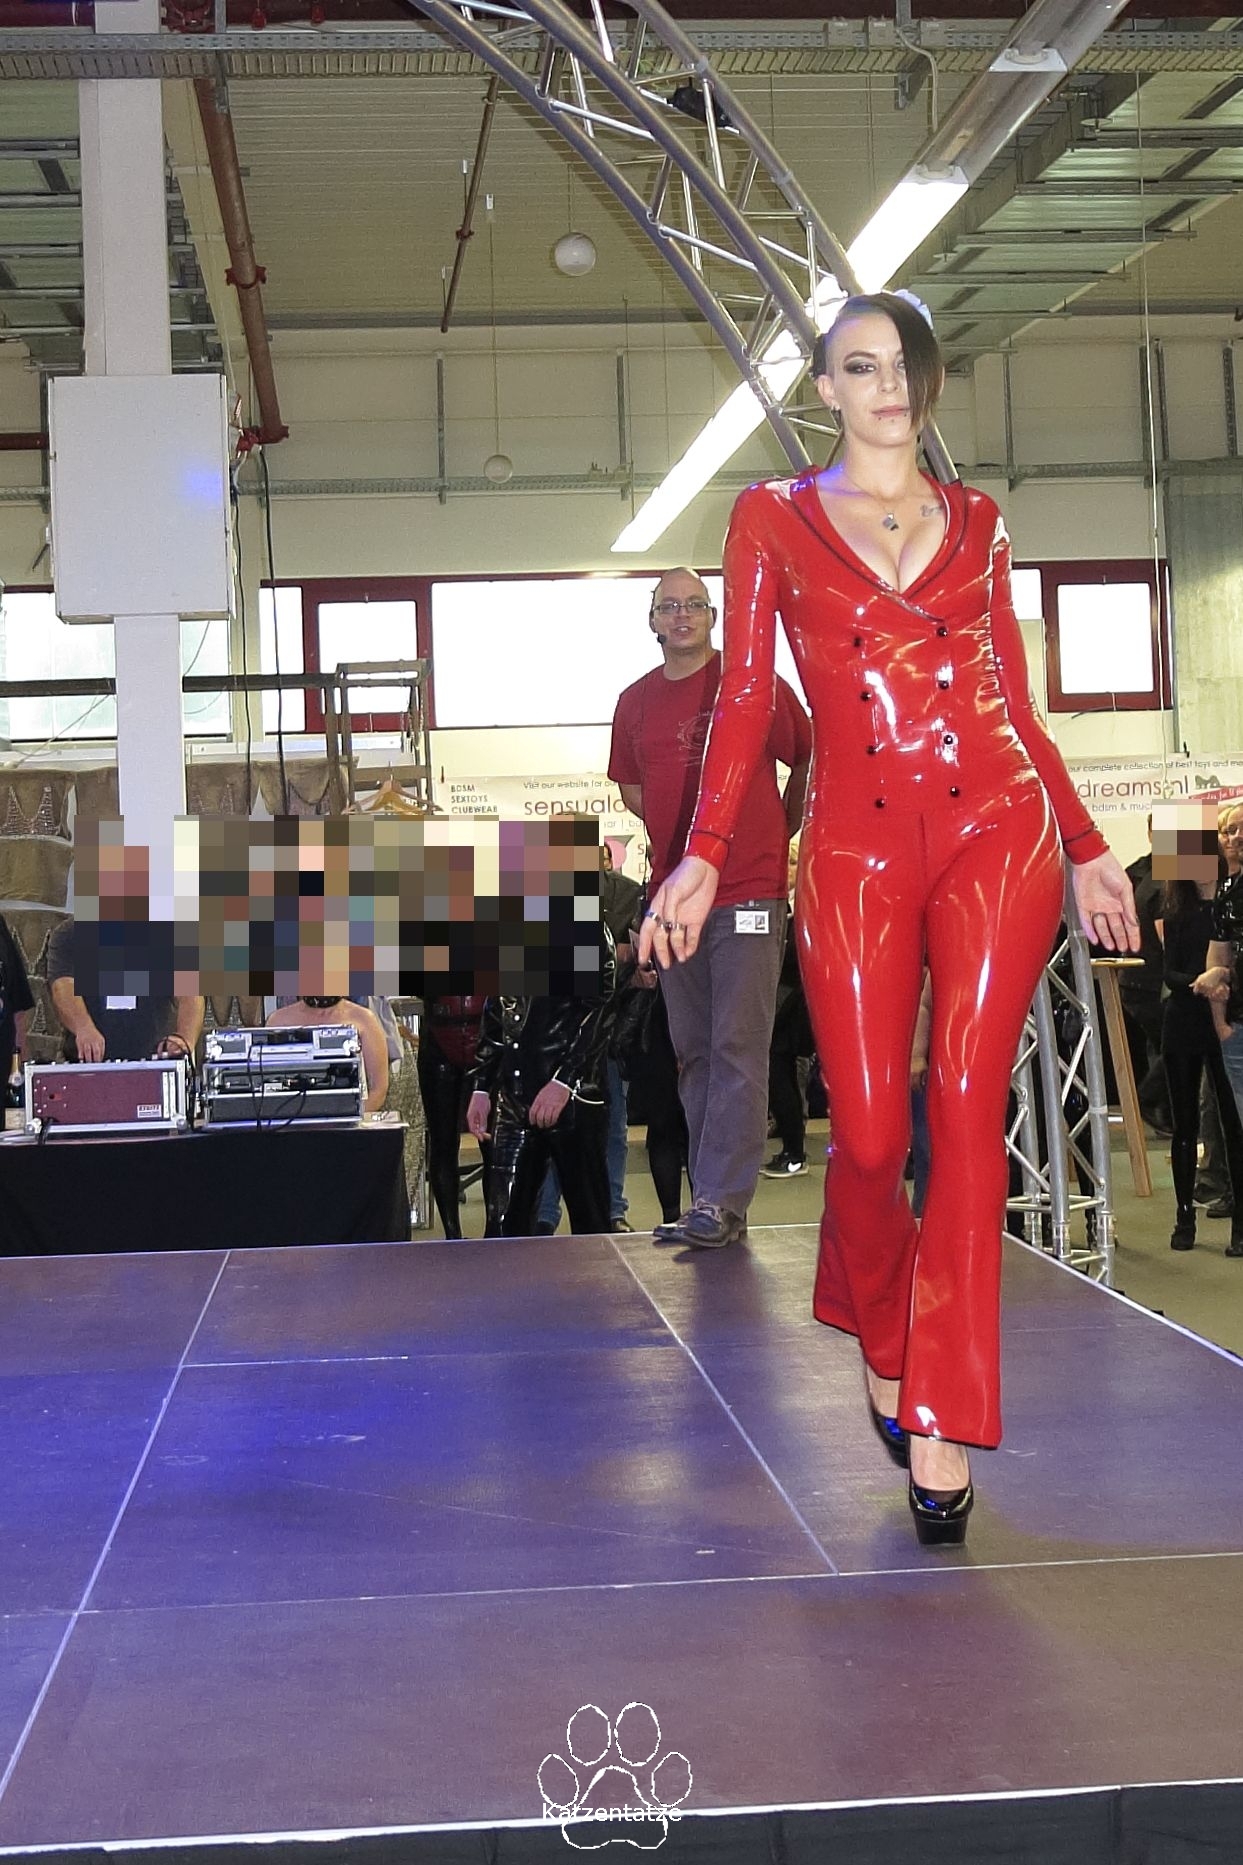 llde Saxe Latex Modenshow mit Model Miss Lupa